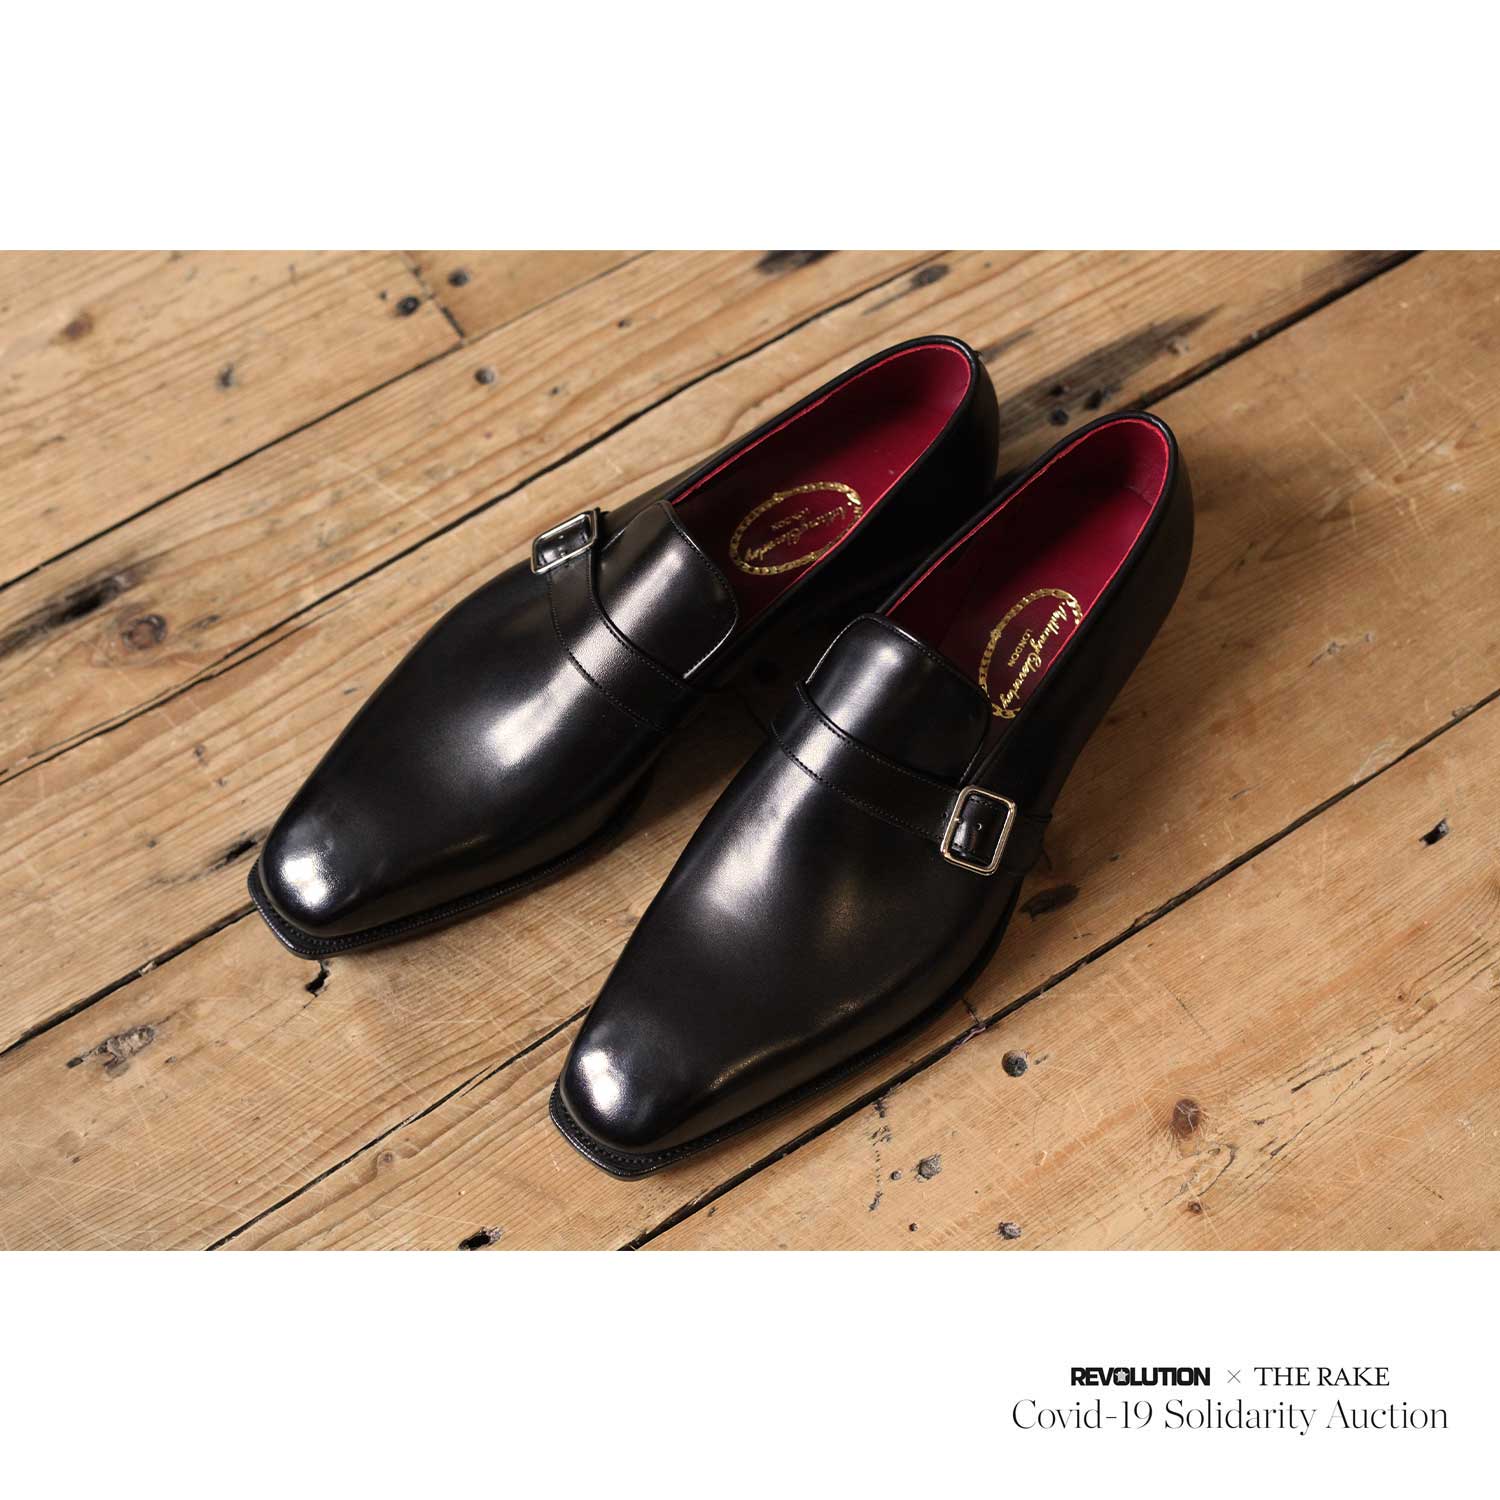 George Cleverley Bespoke Shoes for Revolution x The Rake Covid-19 Solidarity Auction